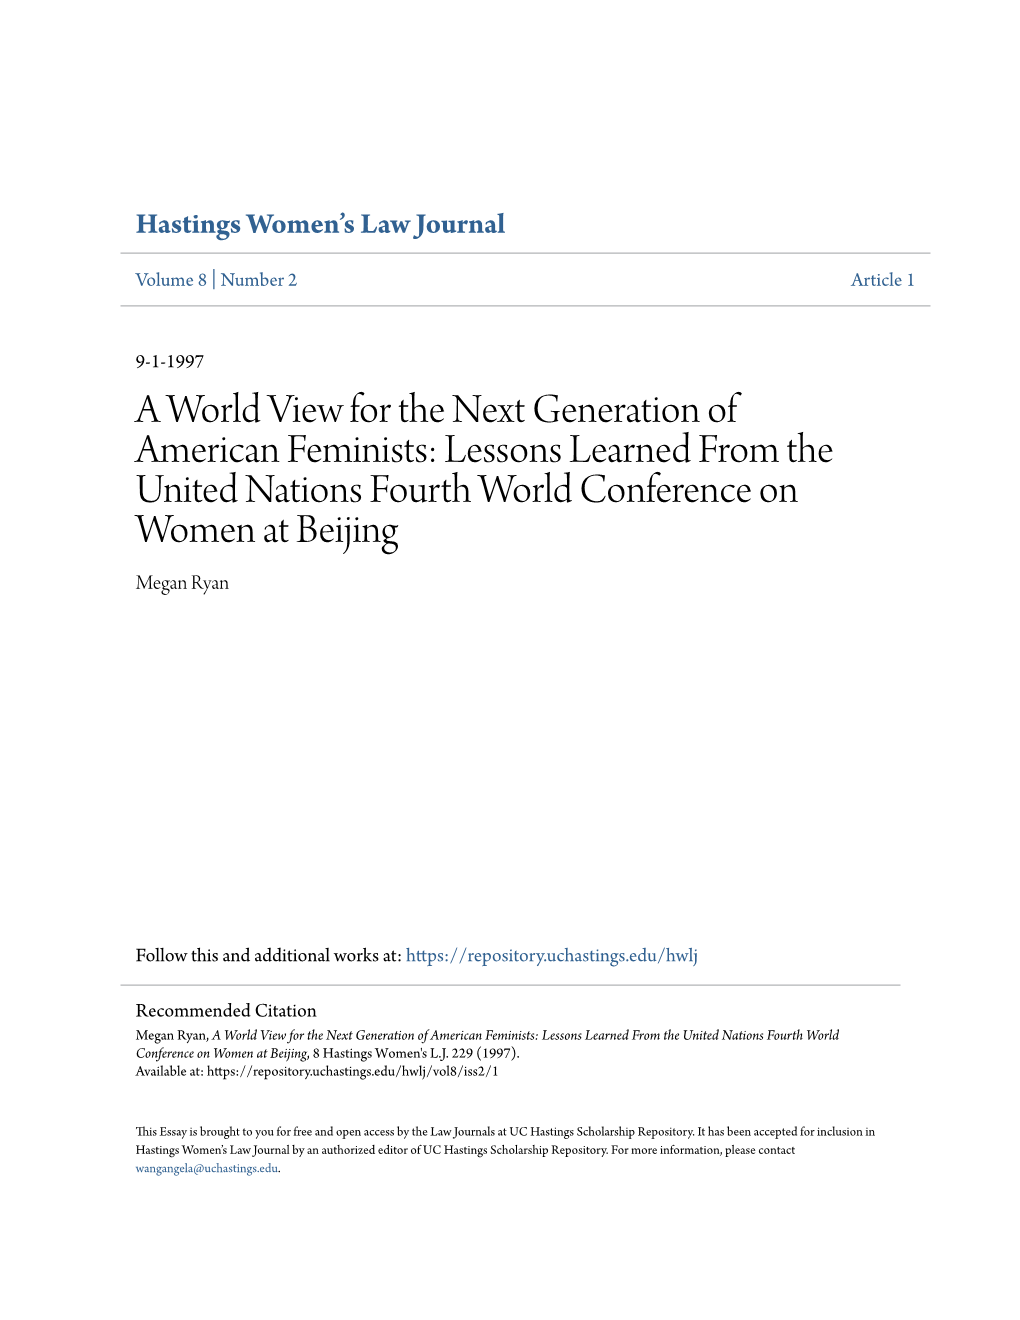 A World View for the Next Generation of American Feminists: Lessons Learned from the United Nations Fourth World Conference on Women at Beijing Megan Ryan